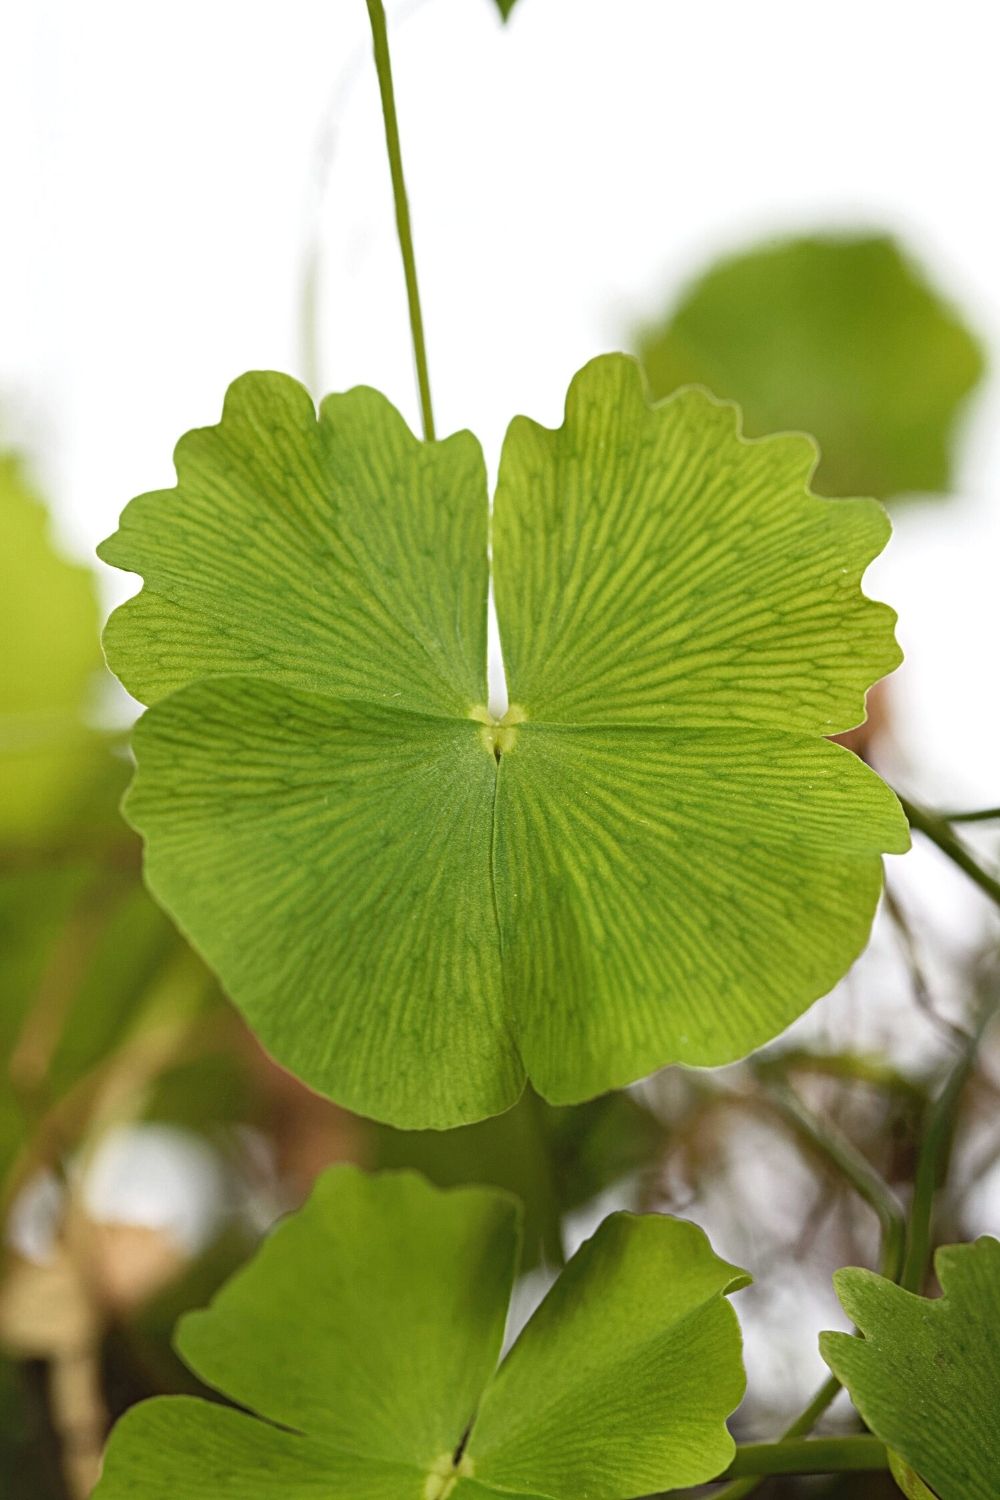 Marsilea Minuta, when grown for your betta fish, acts as lush green grass-like plants 